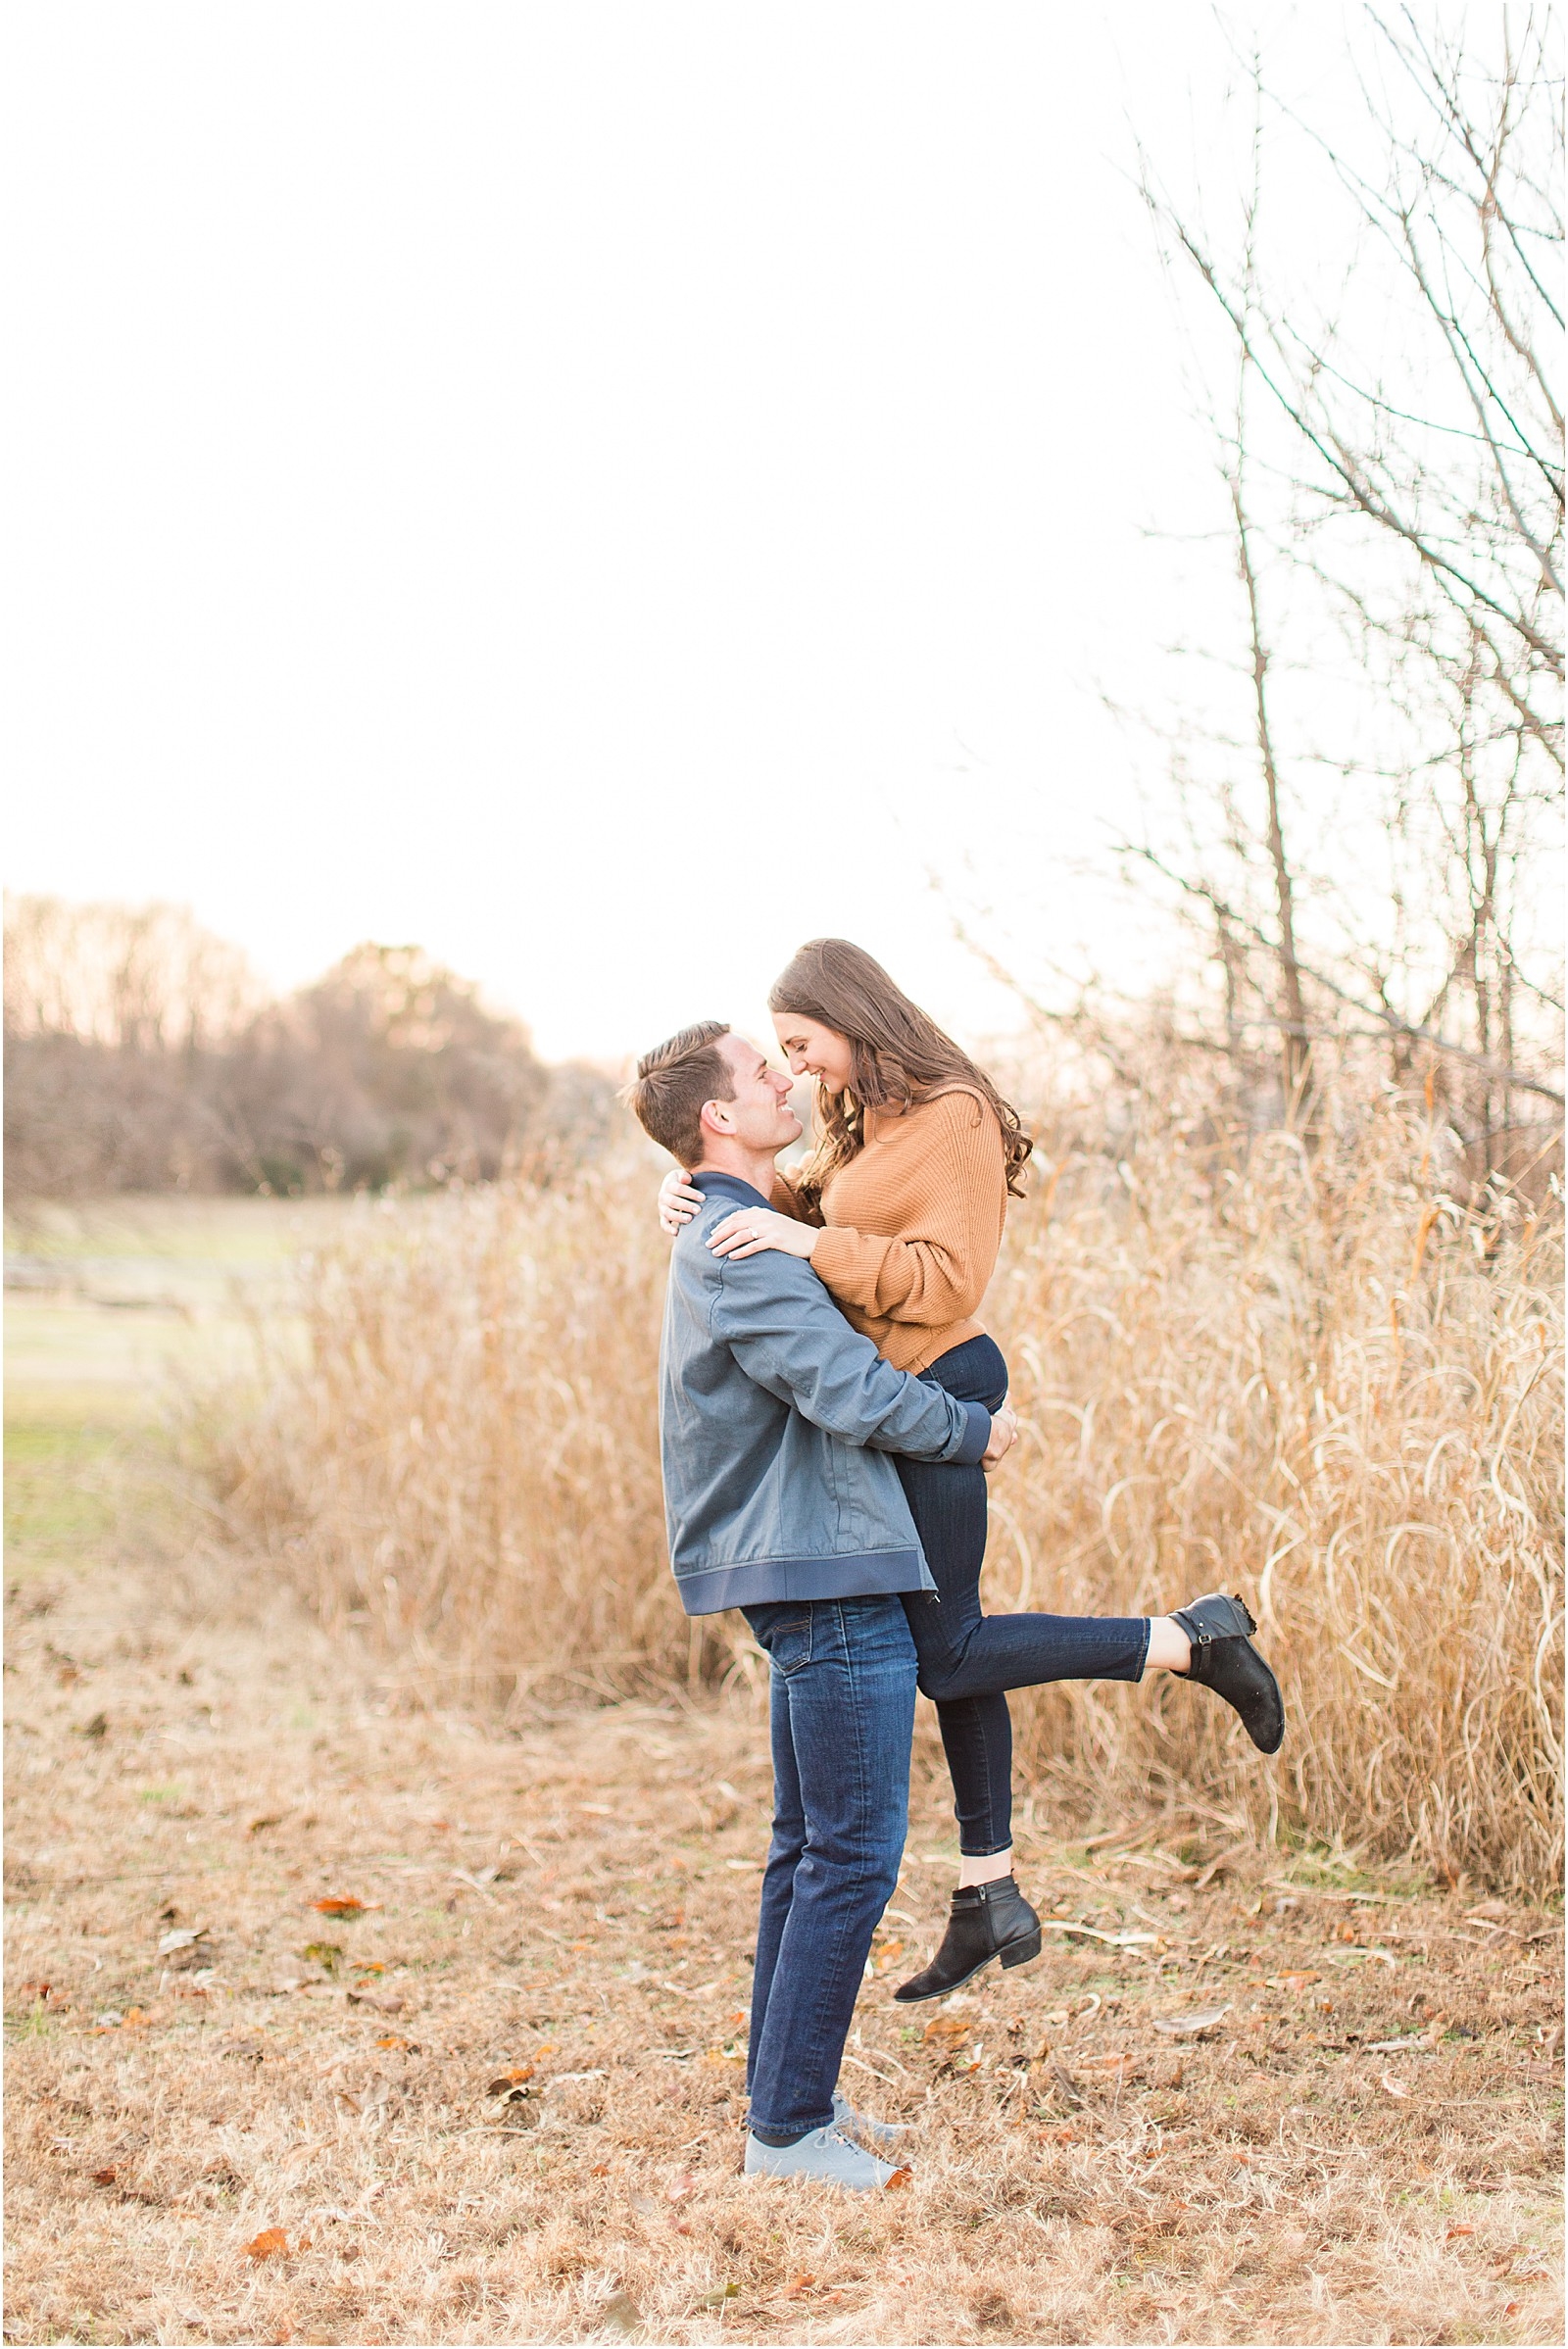 Kaley and Devon's fall Evansville Indiana engagement session. | #fallengagementsession #evansvilleindiana #evansvilleindianawedding | 0047.jpg